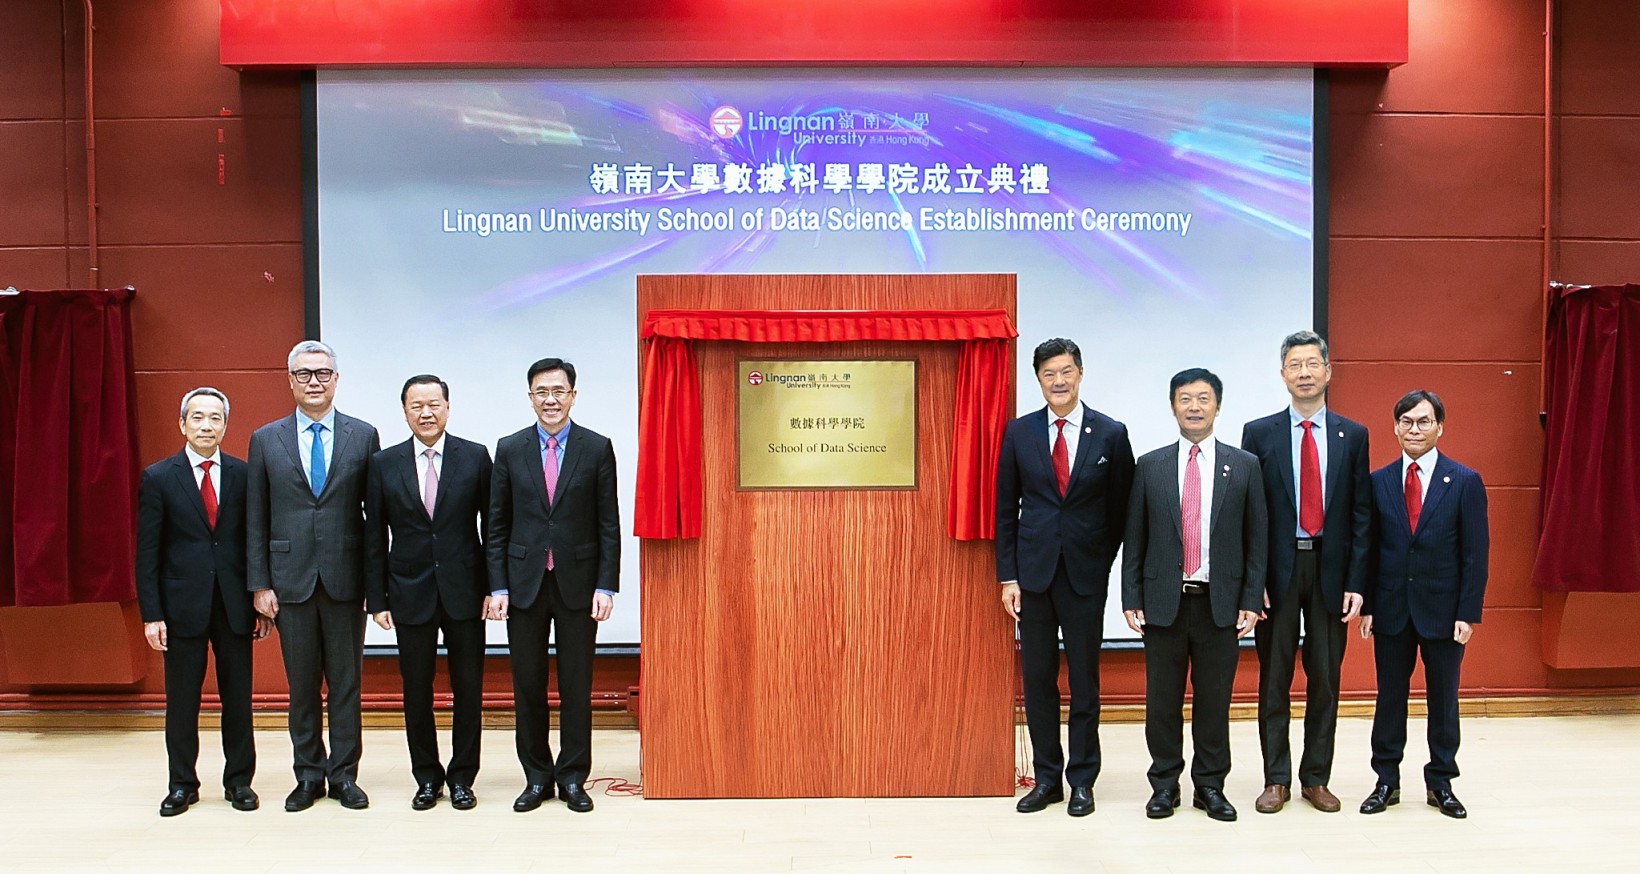 Lingnan University announces the establishment of the School of Data Science. Prof Dong Sun, Secretary for Innovation, Technology and Industry (fourth from left), Mr Tim Lui Tim-leung, Chairman of the University Grants Committee (UGC) (third from left), Dr Rocky Cheng Chung-ngam, CEO of Cyberport (second left), Mr Augustine Lui Ngok-che, Chairman of Lingnan Education Organization (left), Council Chairman Mr Andrew Yao Cho-fai (fourth from right), President Prof S. Joe Qin (third from right), Vice-President (Research and Innovation) Prof Xin Yao (second right), and Acting Dean of the School of Data Science and Associate Vice-President (Strategic Research) Prof Sam Kwong Tak-wu (right) unveil the plaque for the School of Data Science. 